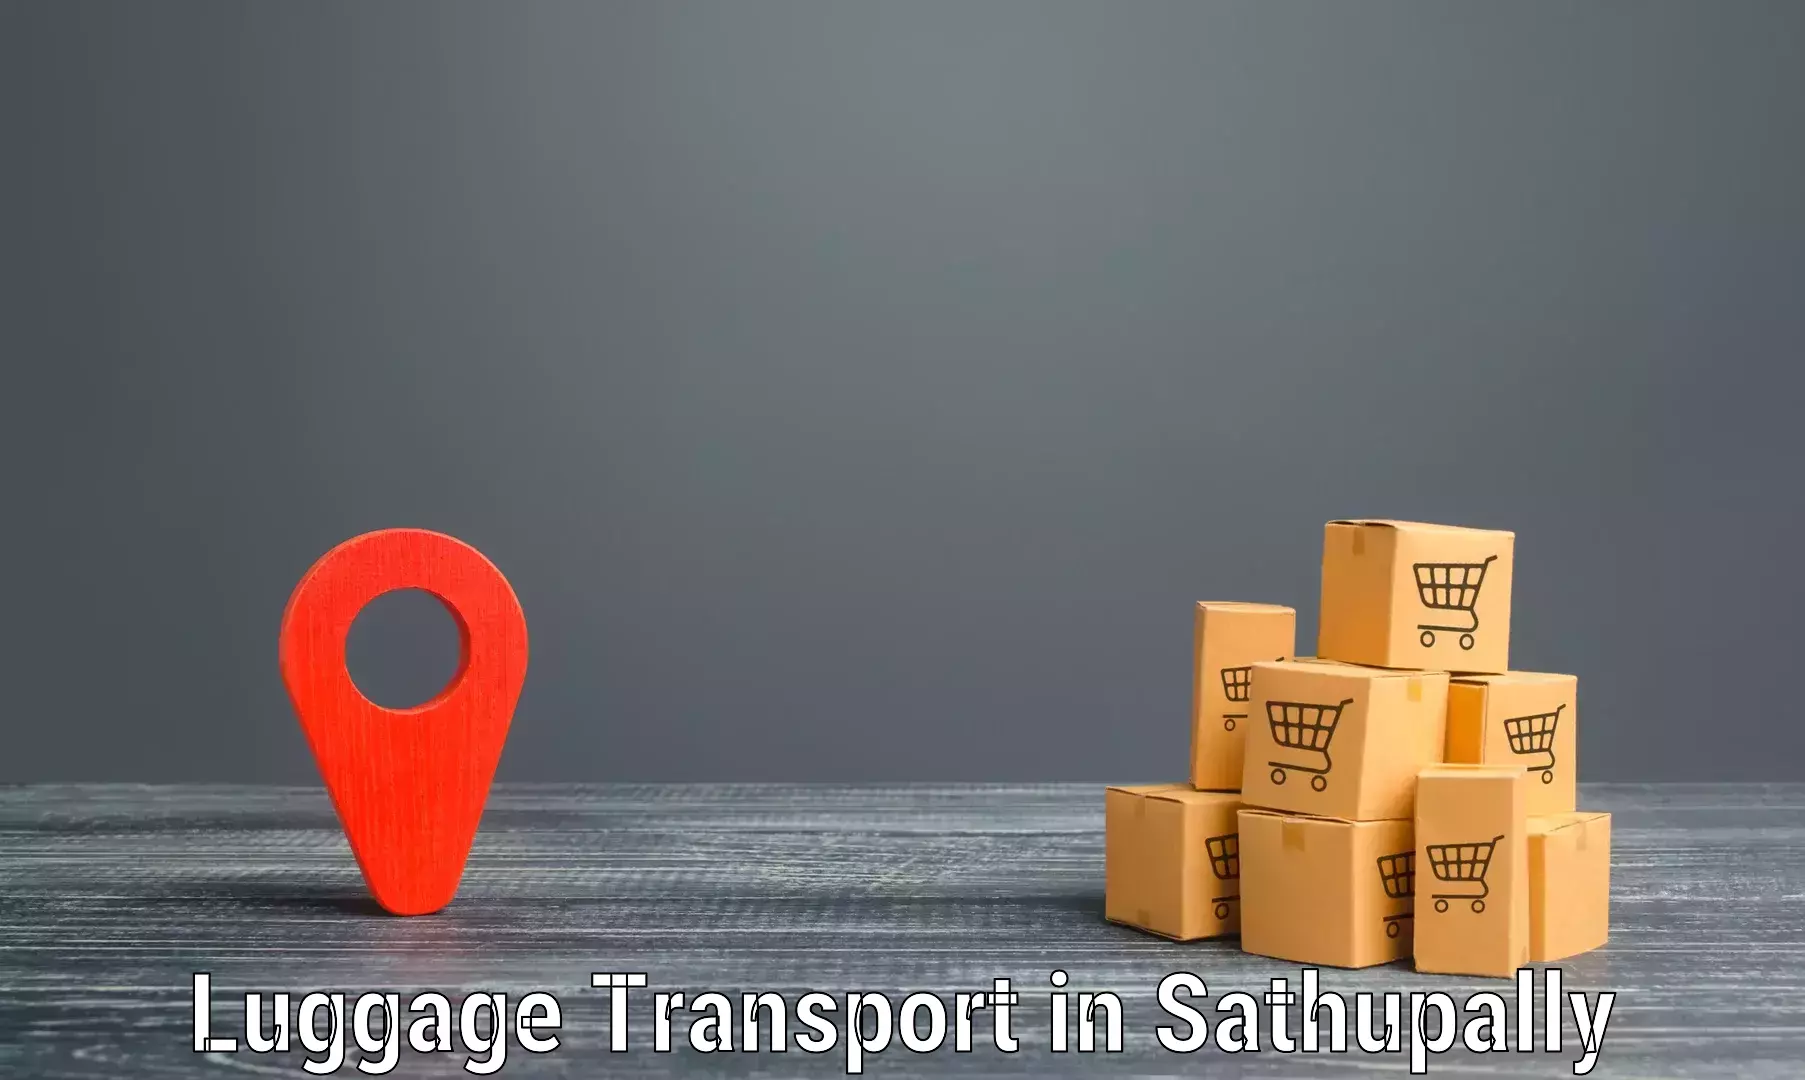 Luggage shipment tracking in Sathupally